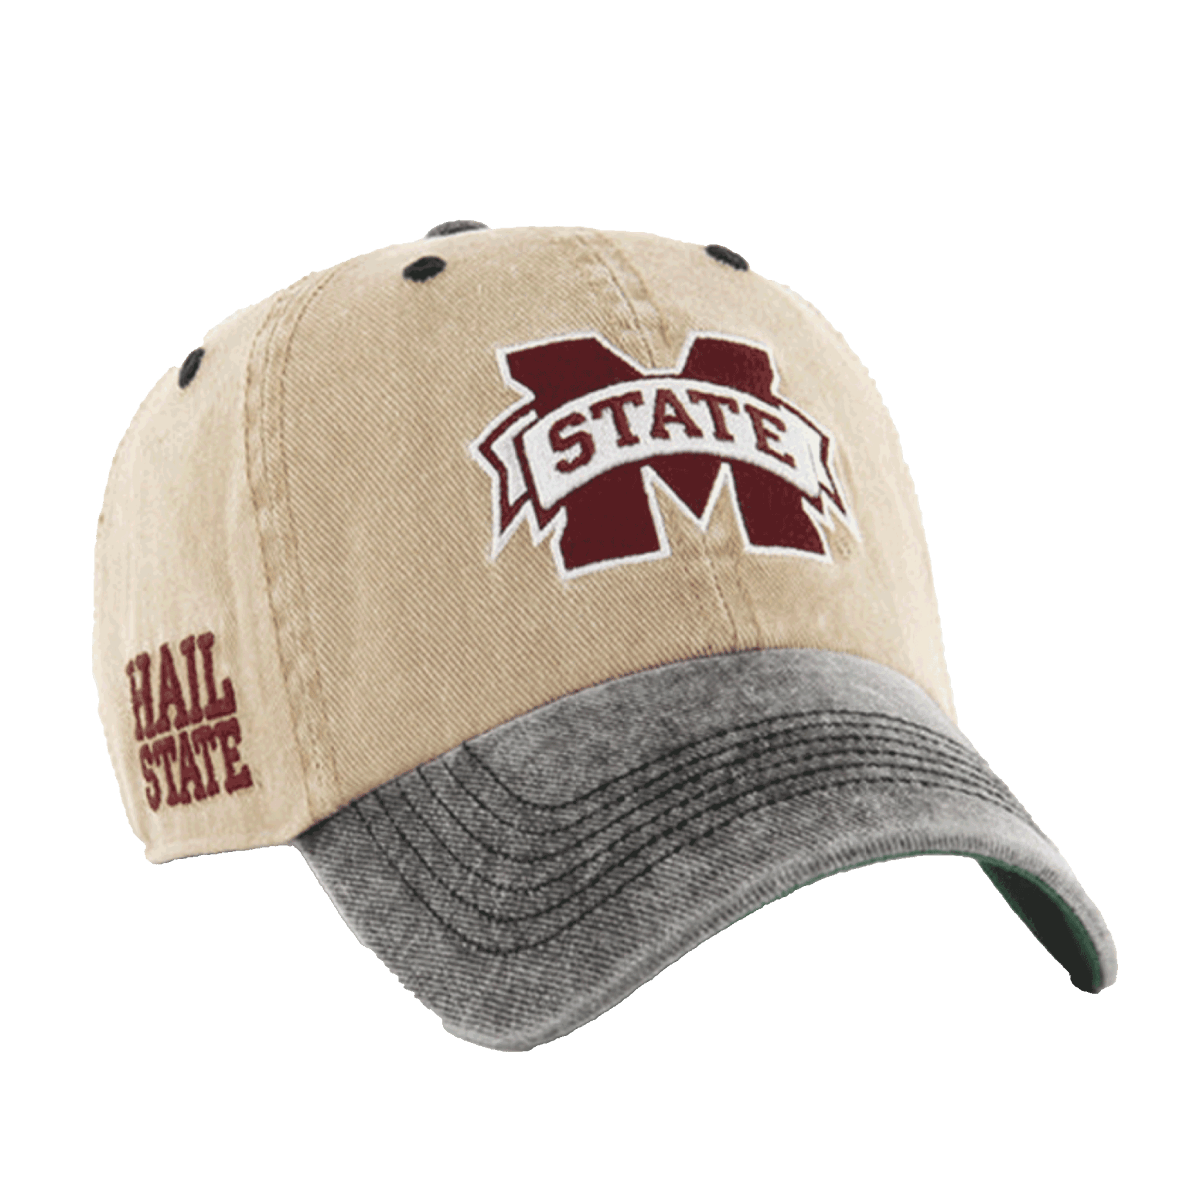 Mississippi State University 47 Brand Clean Up All Hat - Shop B-Unlimited